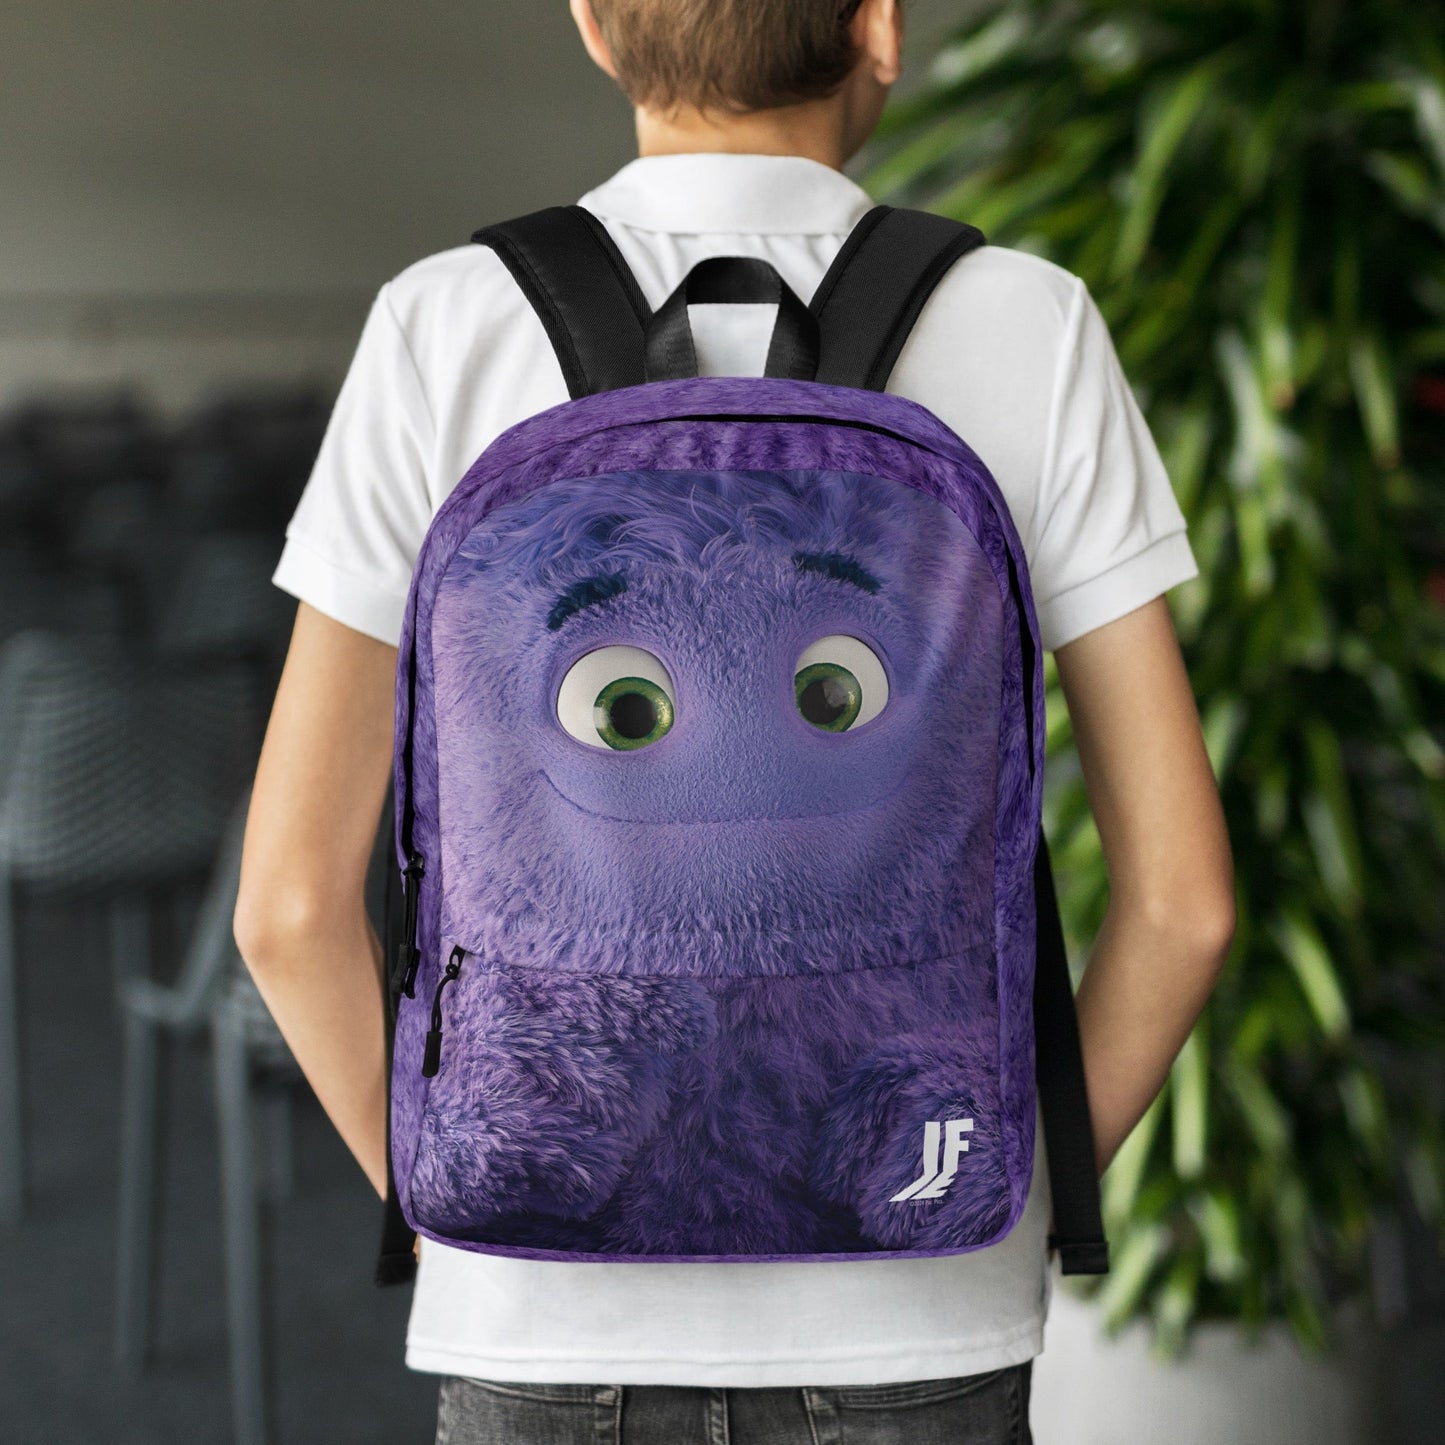 IF BLUE Backpack - Paramount Shop